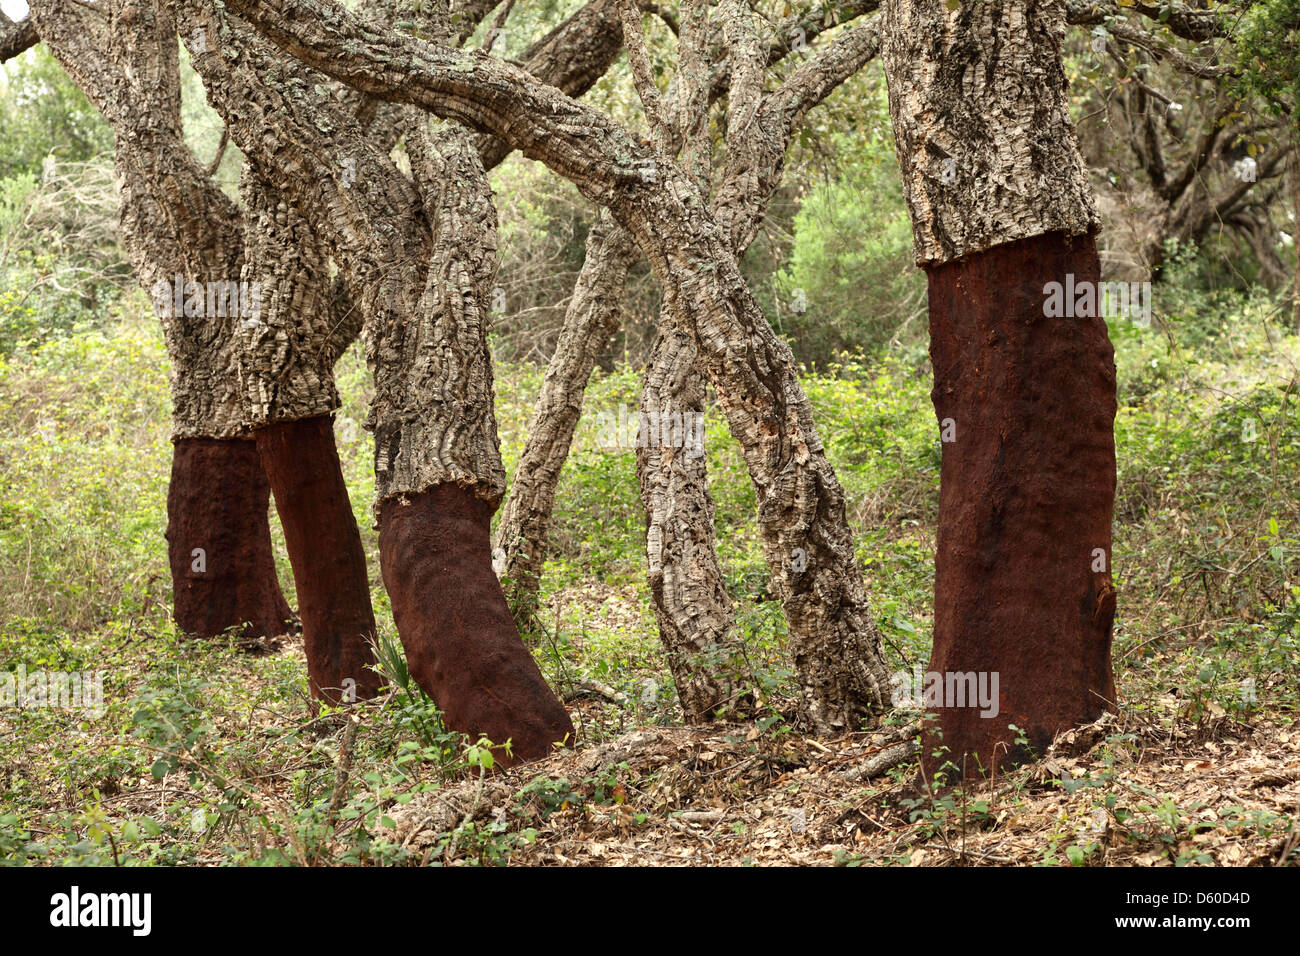 Cork trees in Andalusia, southern Spain Stock Photo